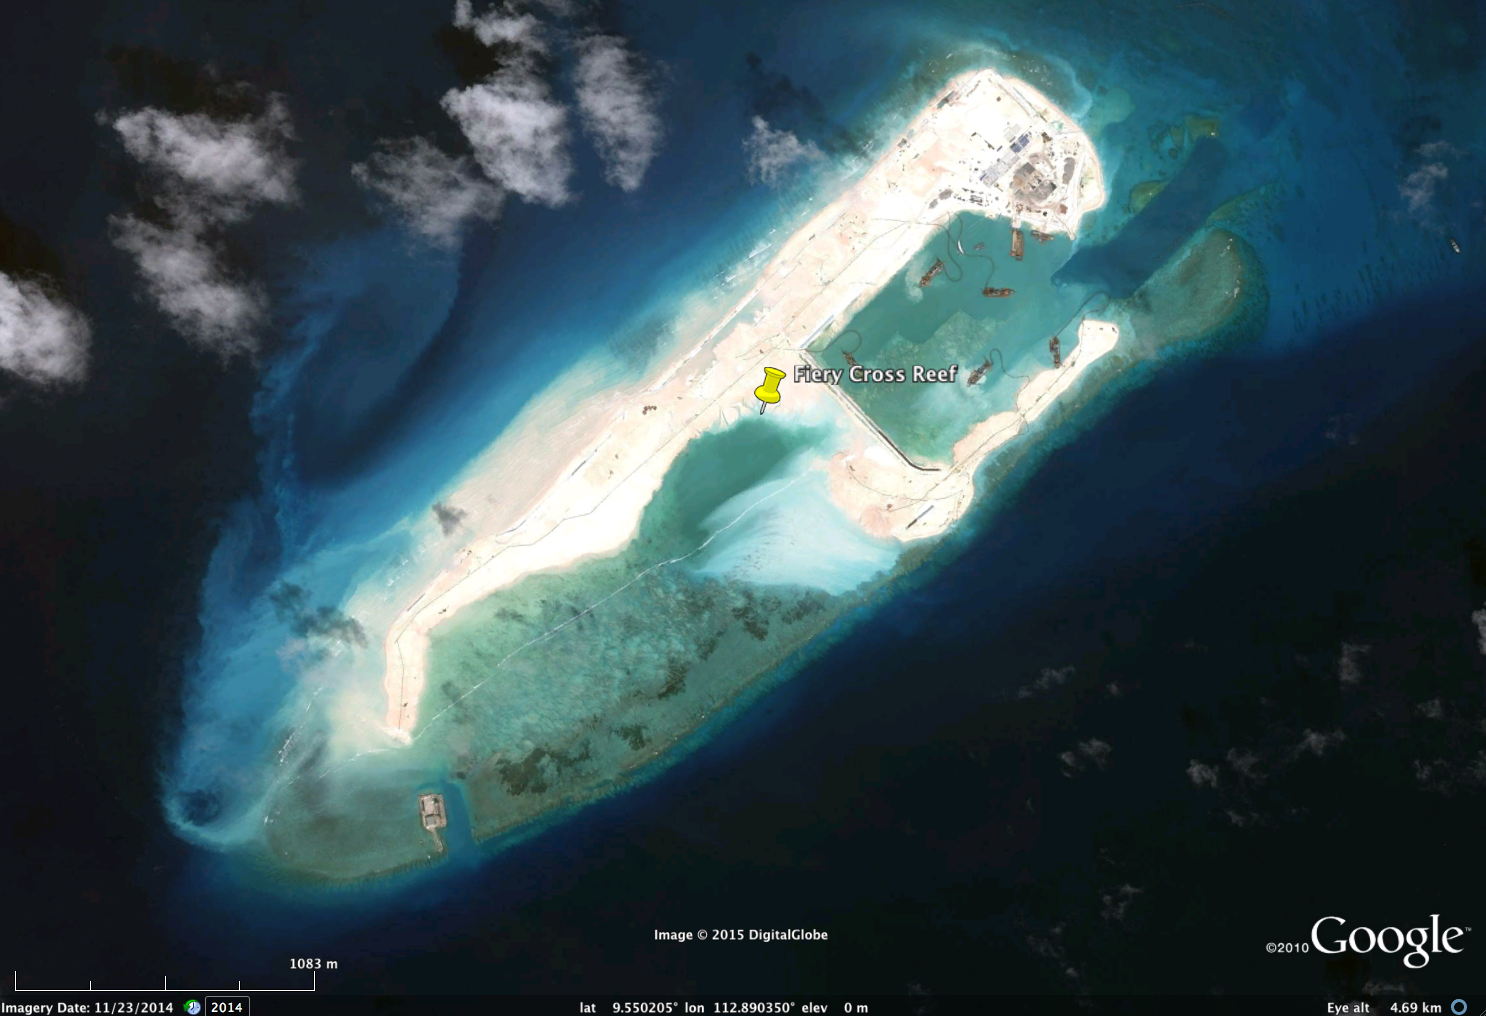  FieryCrossReef, Nov.&nbsp;23, 2014. Bright white and light brown areas are ‘reclaimed’ land, i.e., where sediments have been&nbsp;dredged from adjacent seafloor areas and pumped on top of live coral reefs (which die&nbsp;once smothered). Note presen